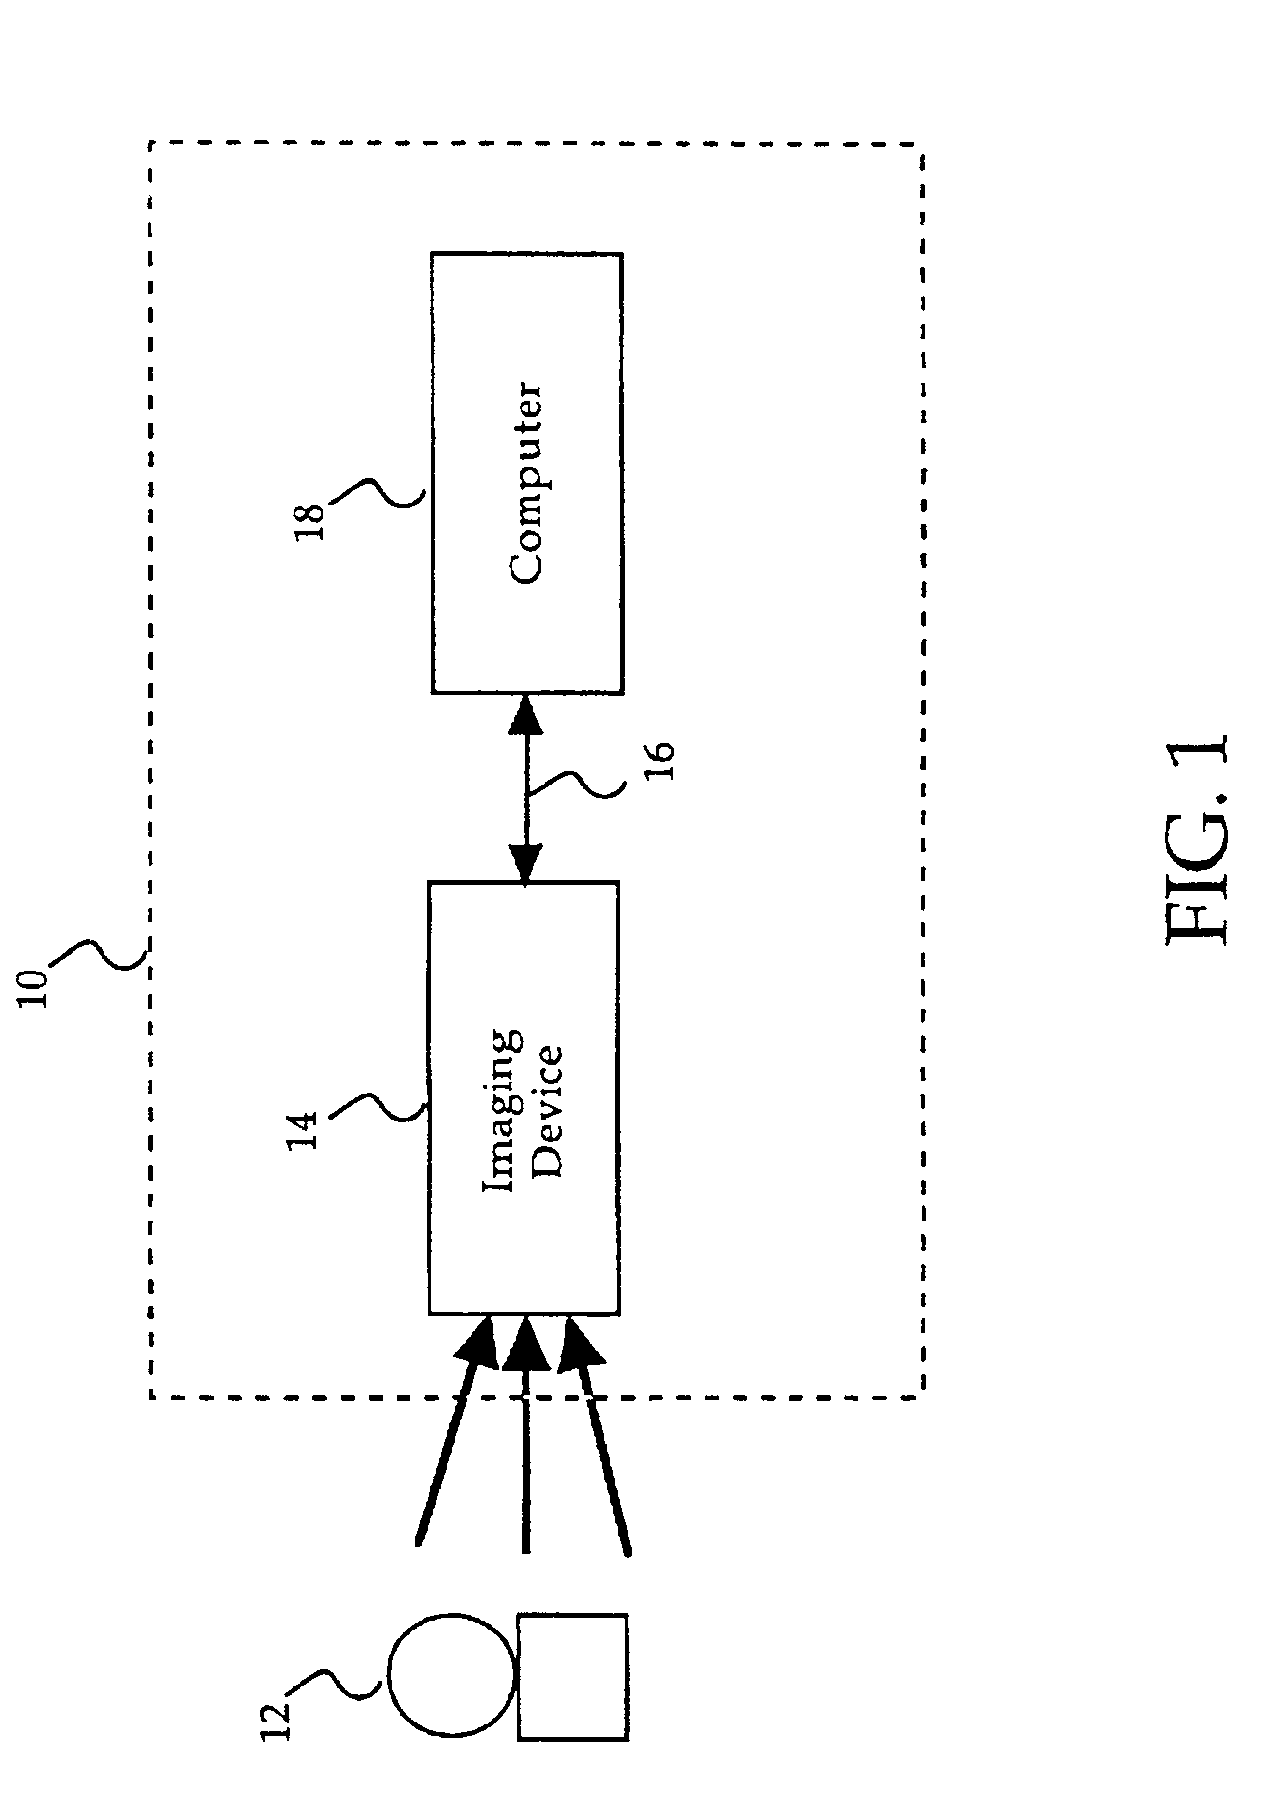 Apparatus and method for increasing a digital camera image capture rate by delaying image processing